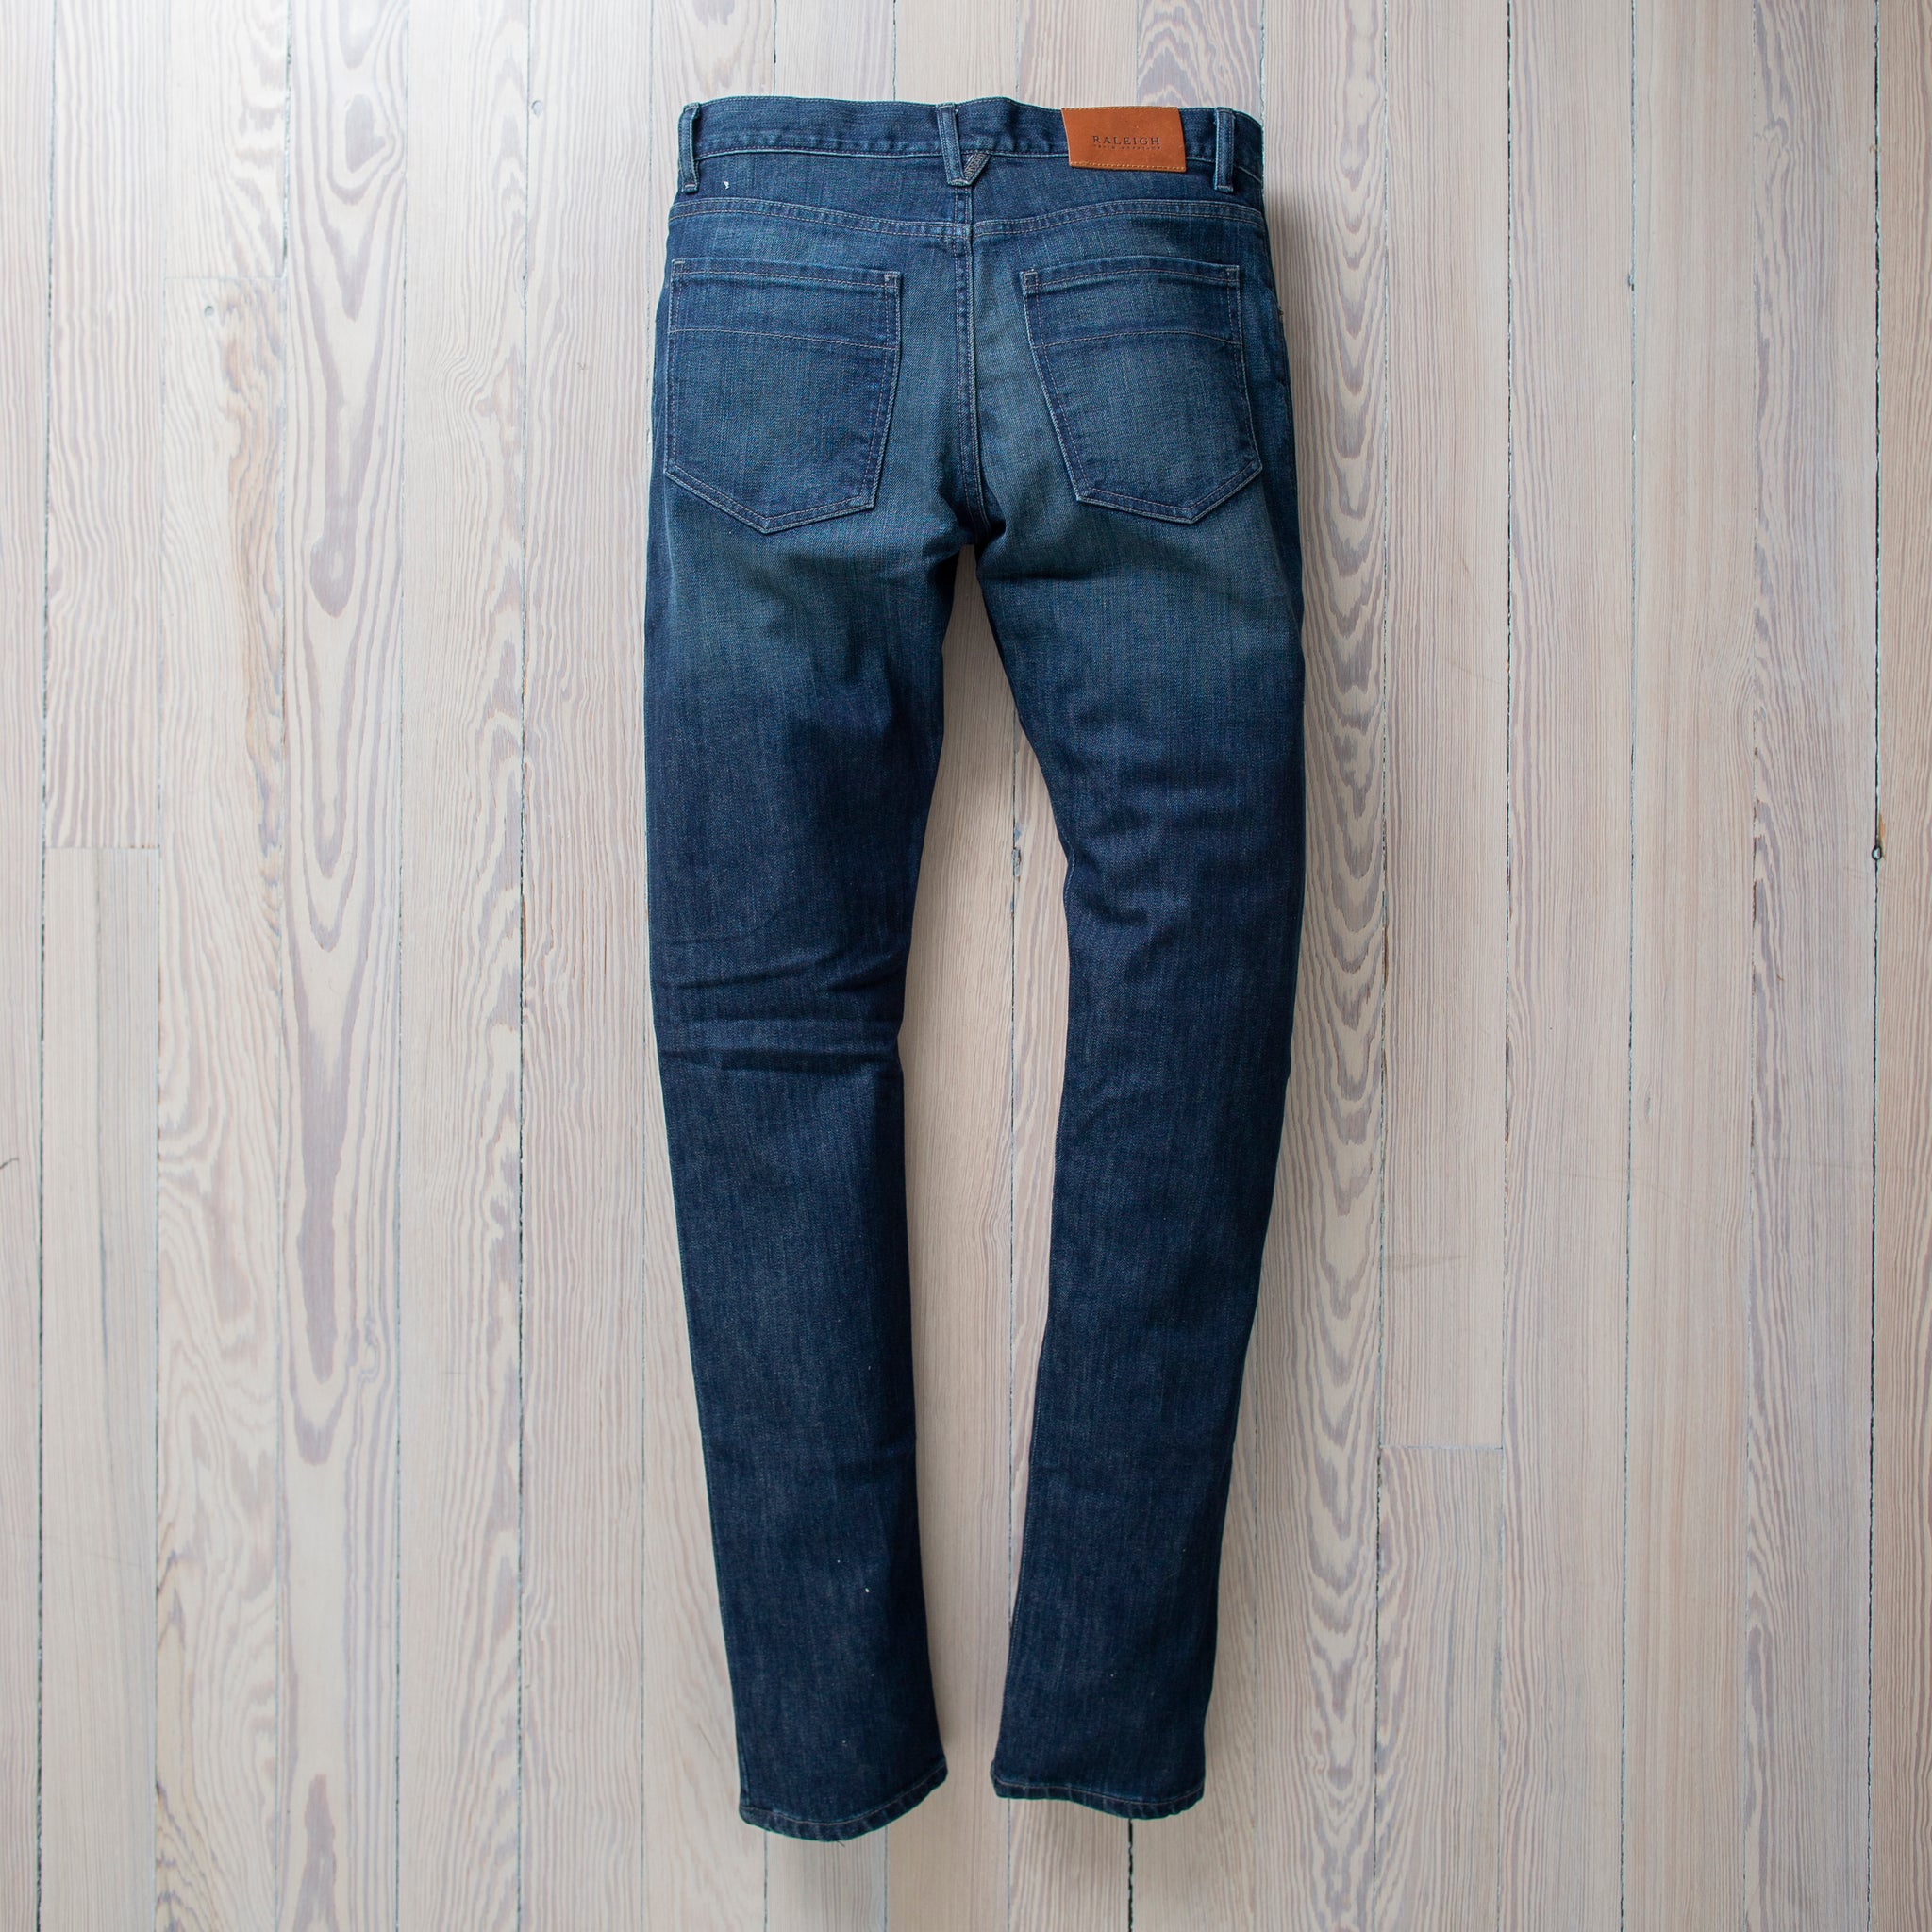 angle: mason Raleigh Denim Workshop Martin thin taper fit in mason wash, front view